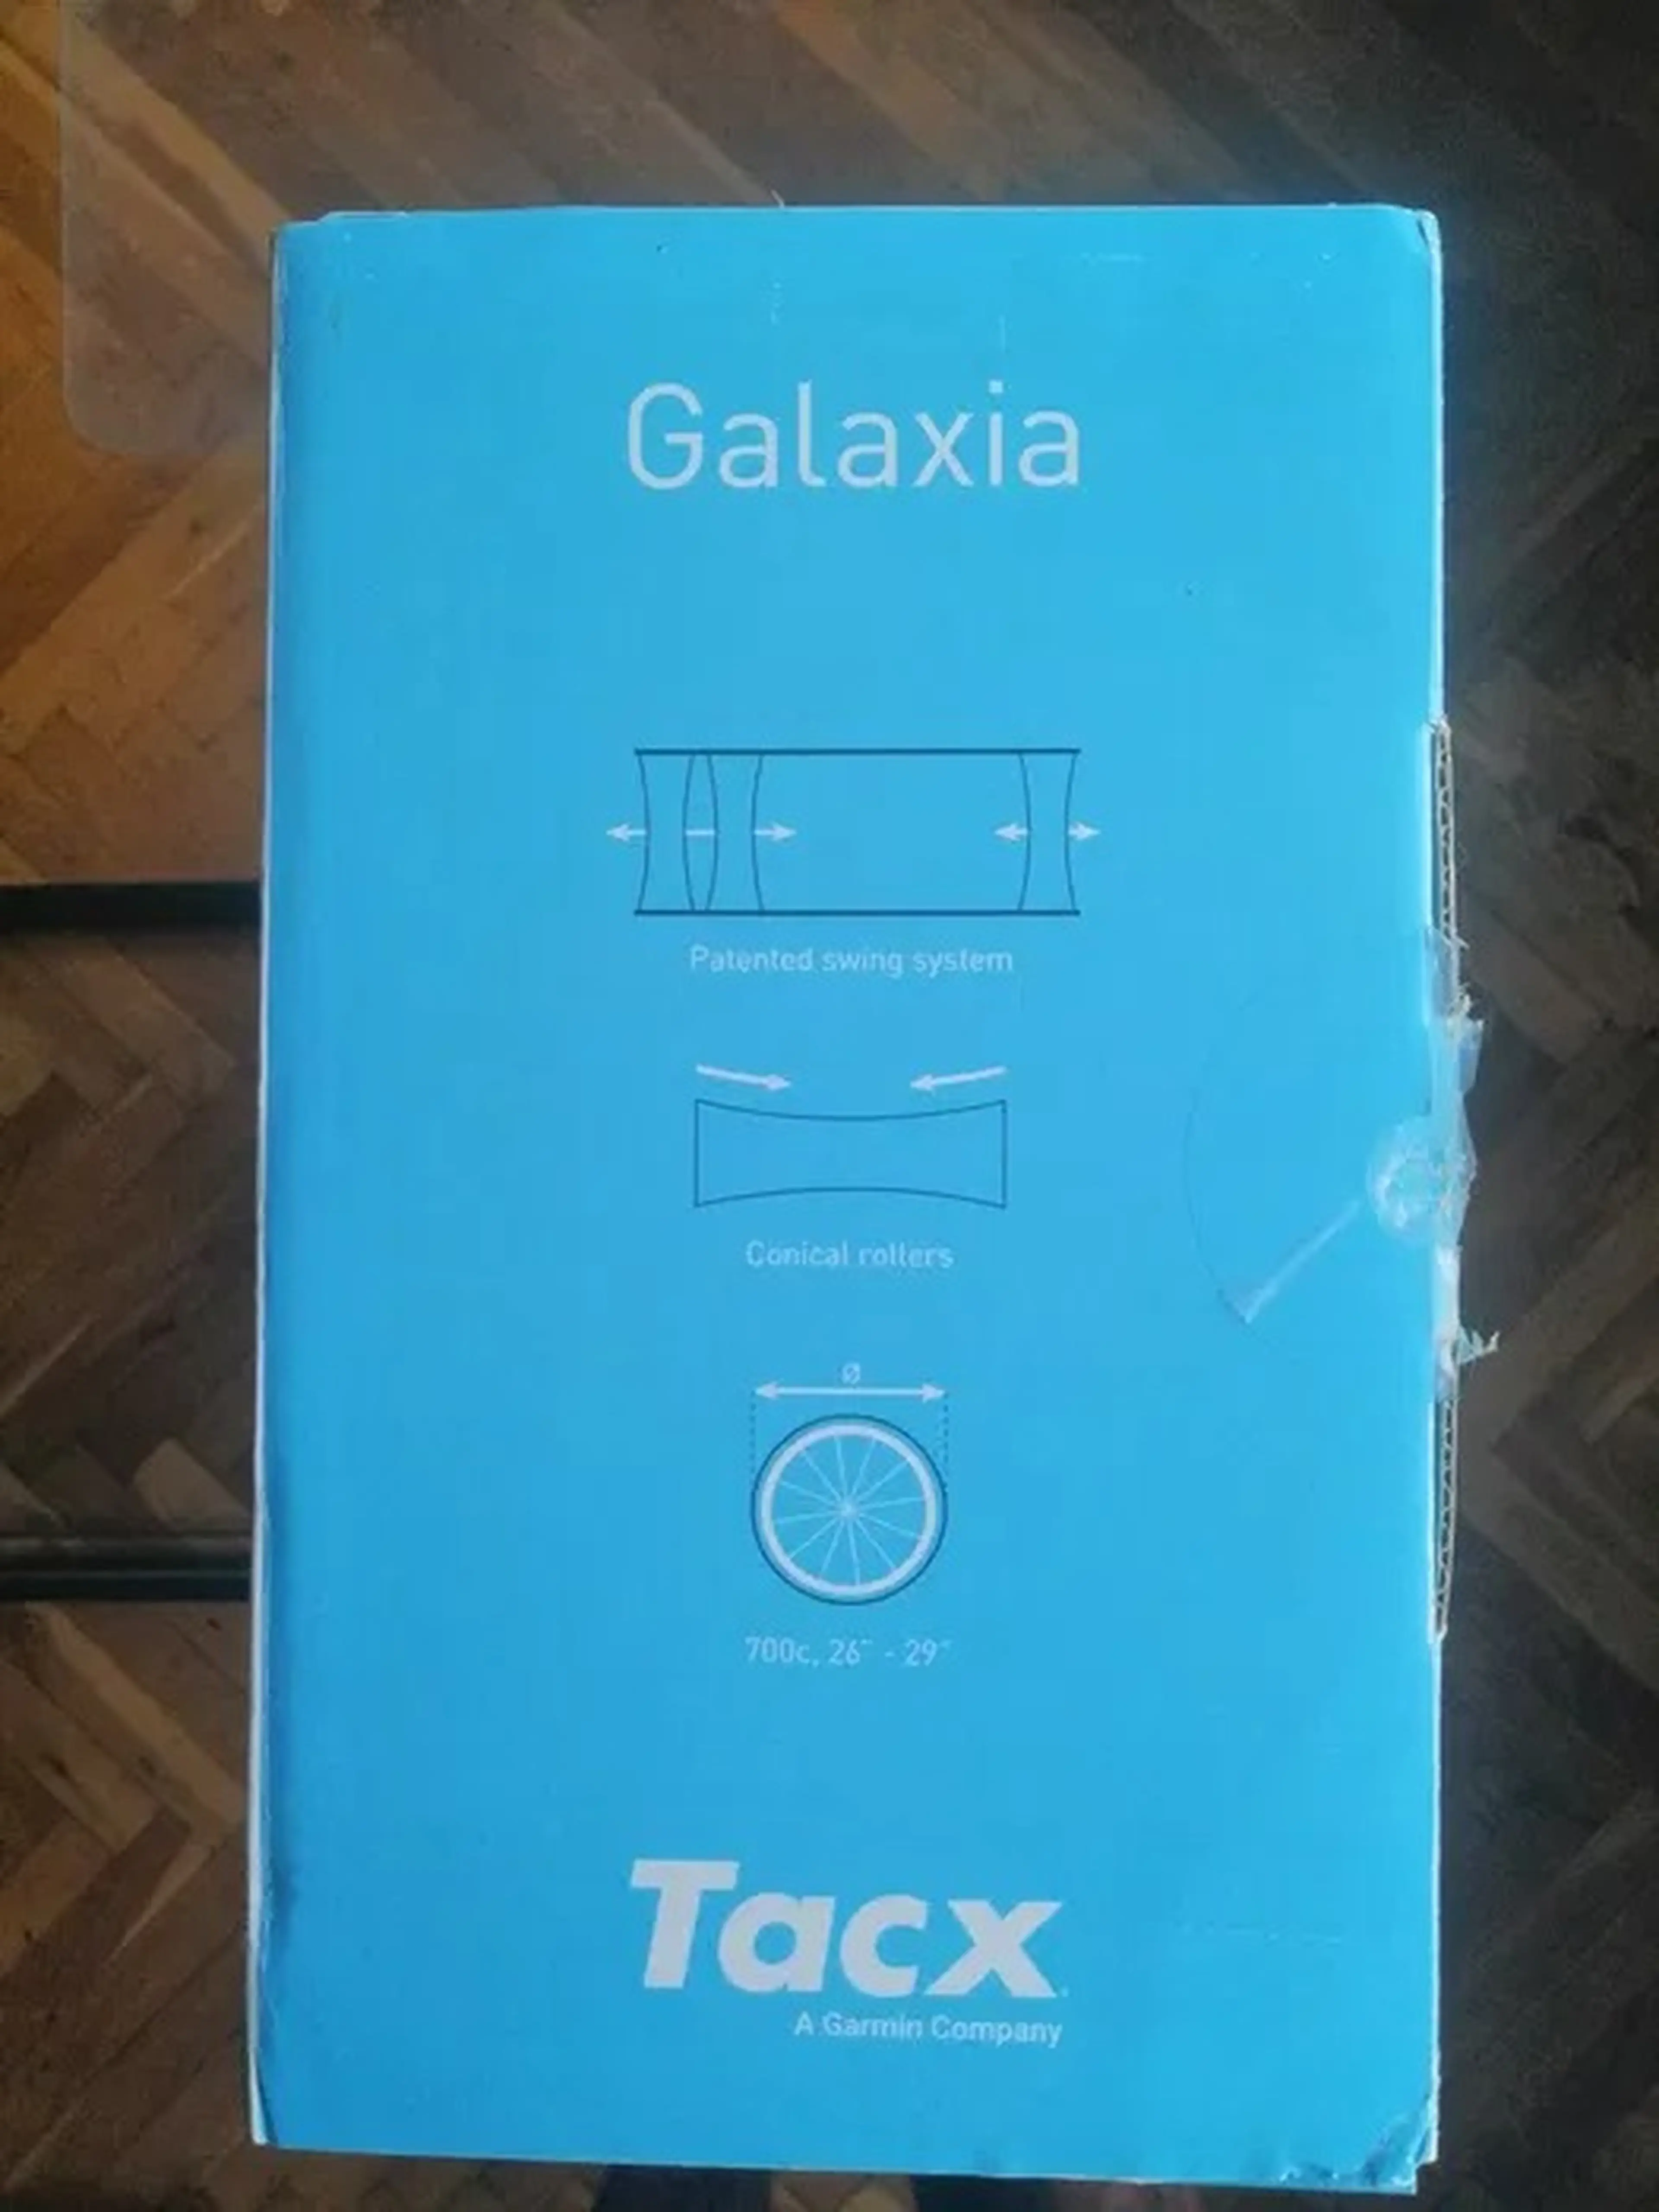 1. Roller Tacx Galaxia